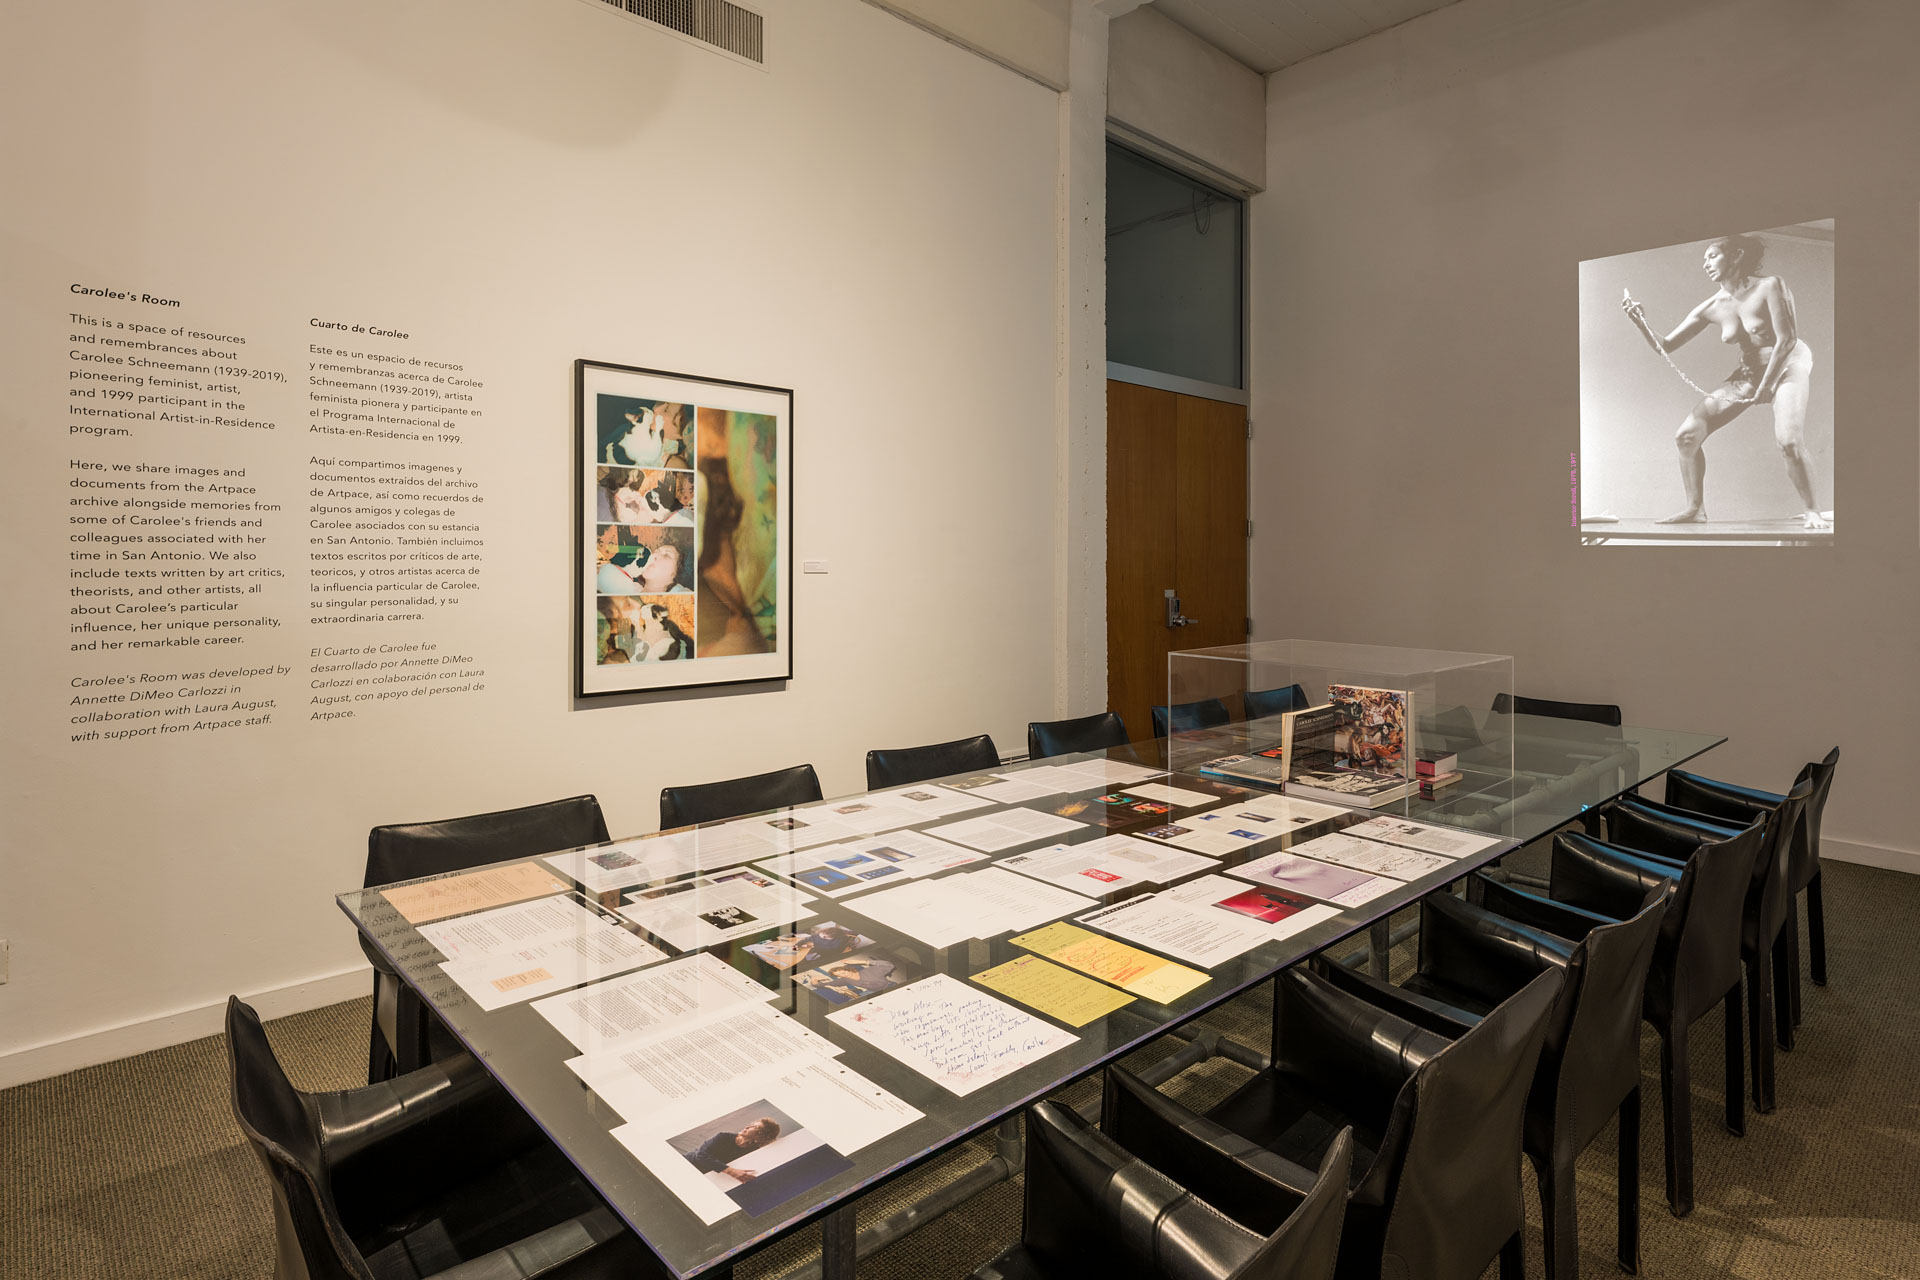 Carolee's Room, which includes a table covered in photocopied letters and texts by Carolee Schneemann with a glass box exhibiting sketches and art materials on the table. On the wall is a projected still image of Schneemann performing 